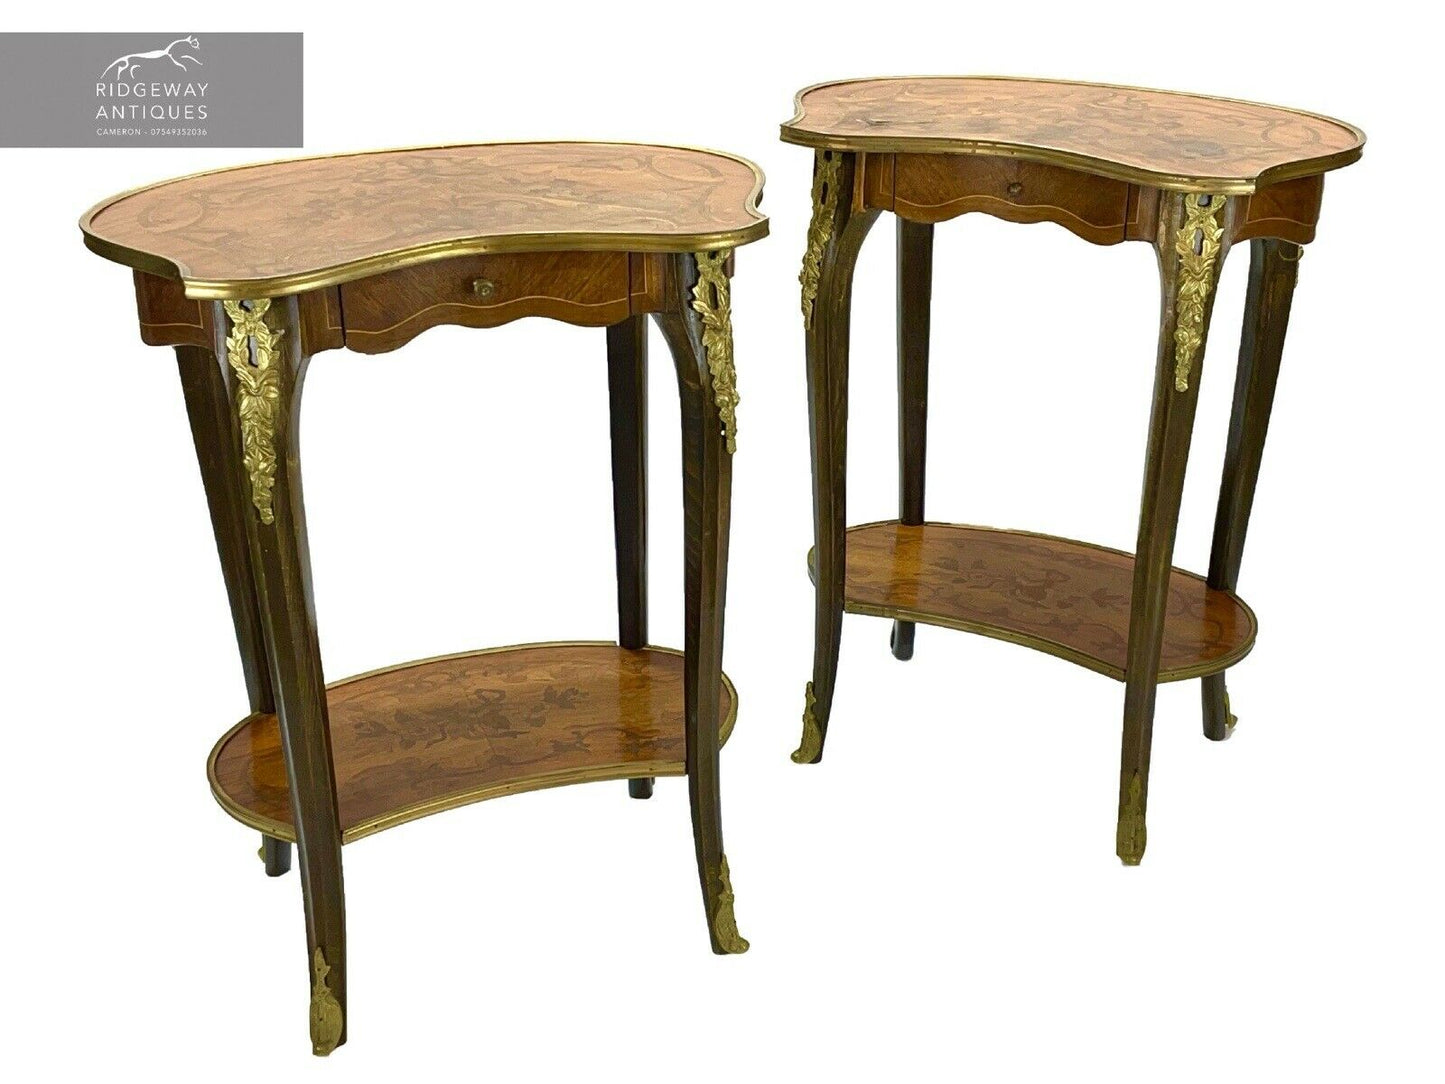 Pair Of Louis XVI Style Kidney Shaped Tables